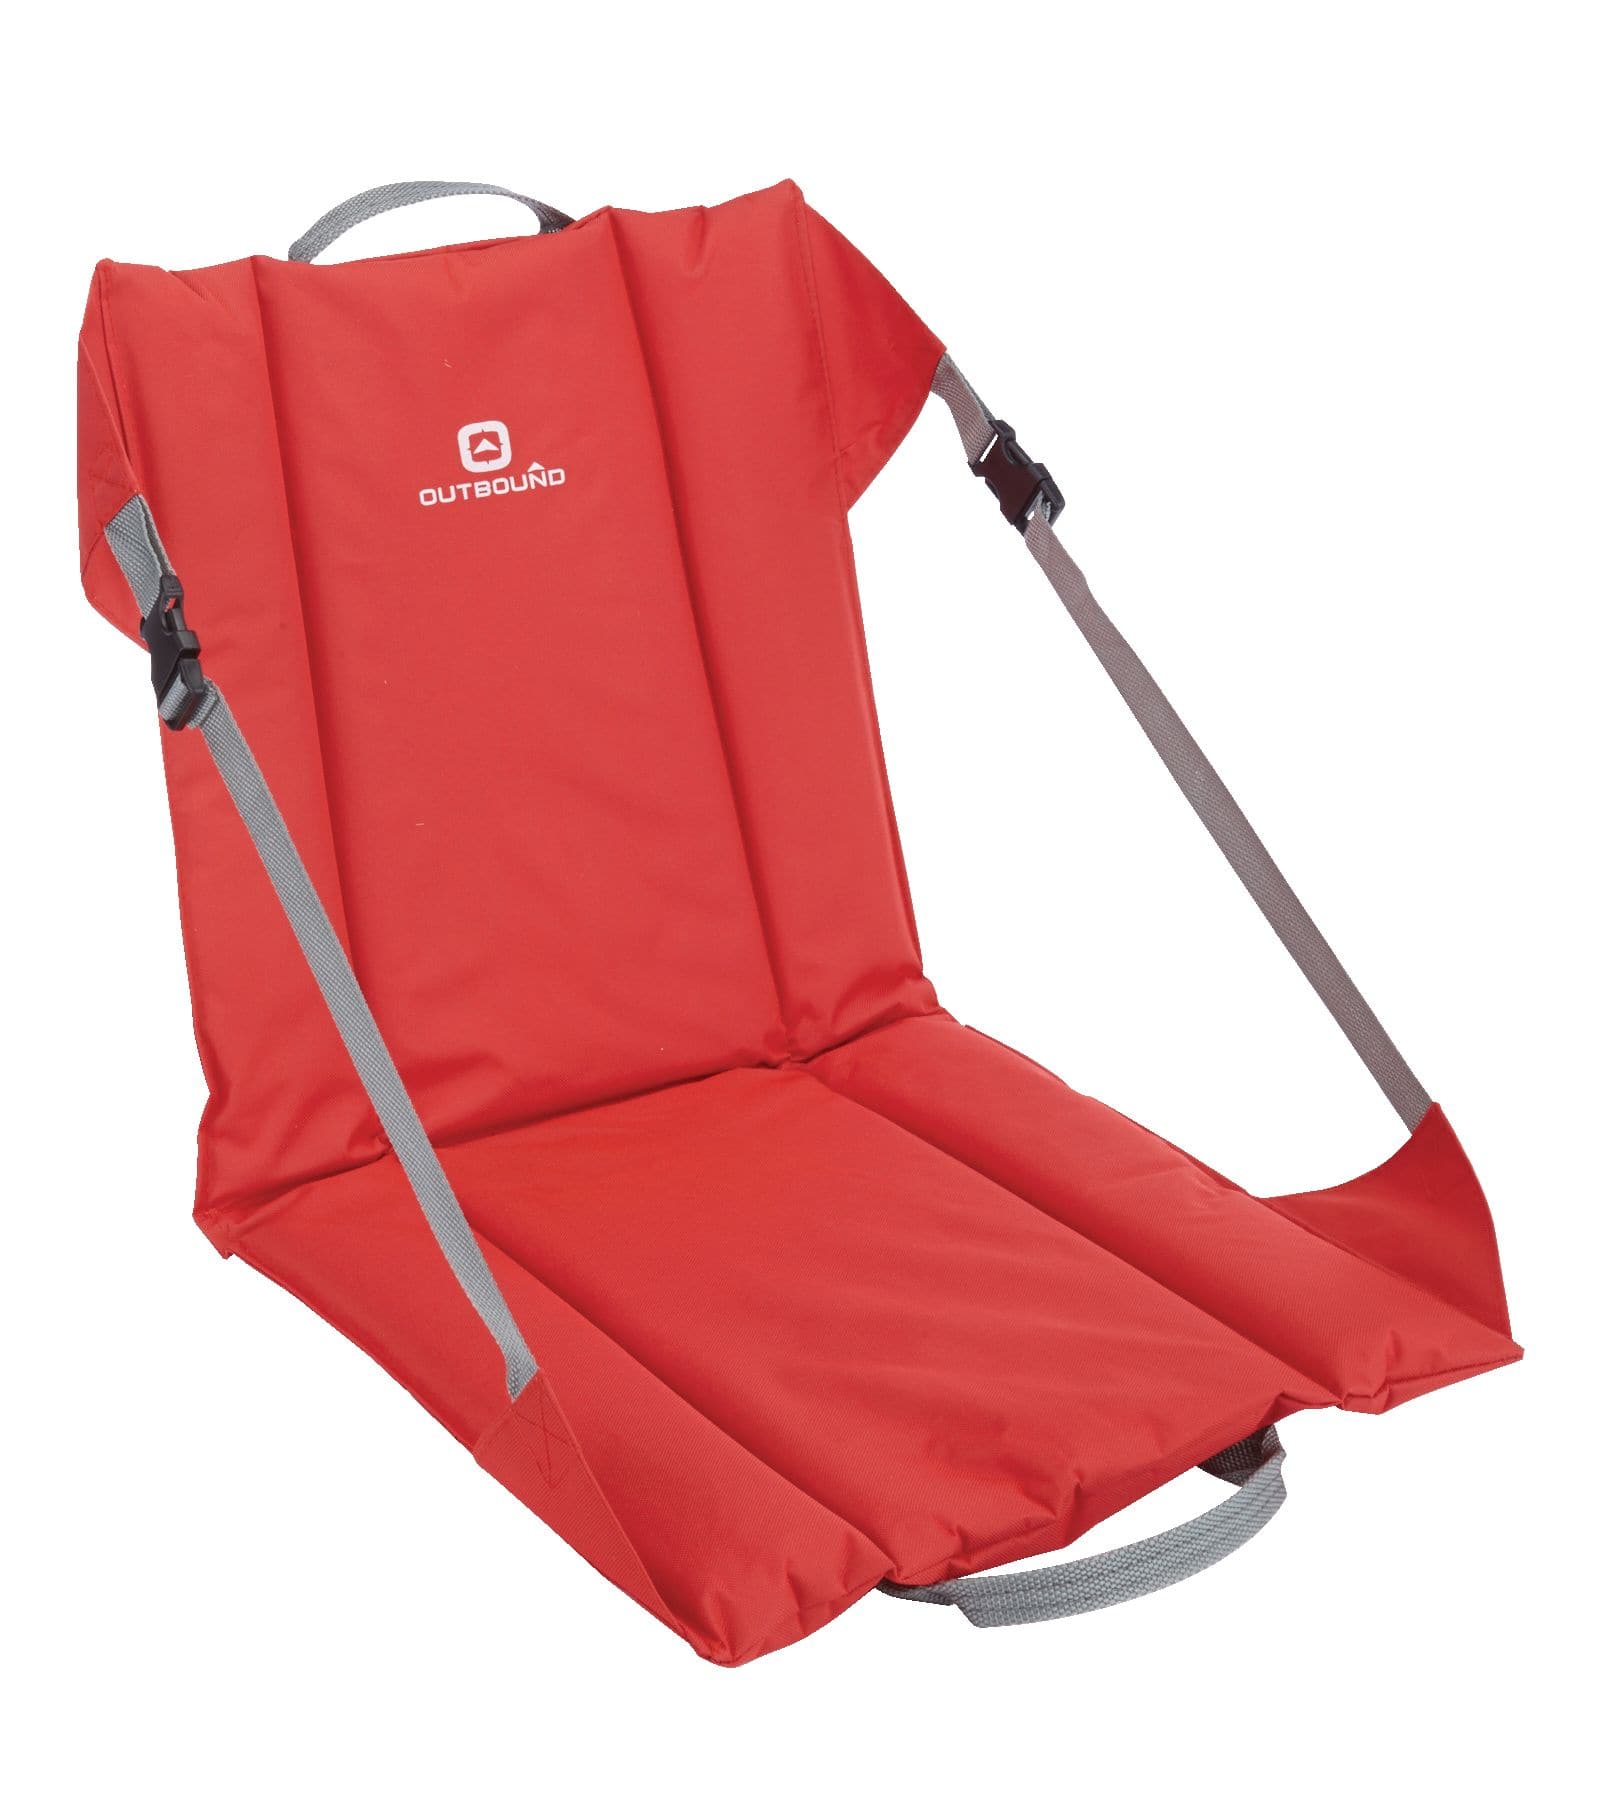 Outbound Venice Portable Folding Low-Profile Beach Chair w/ High